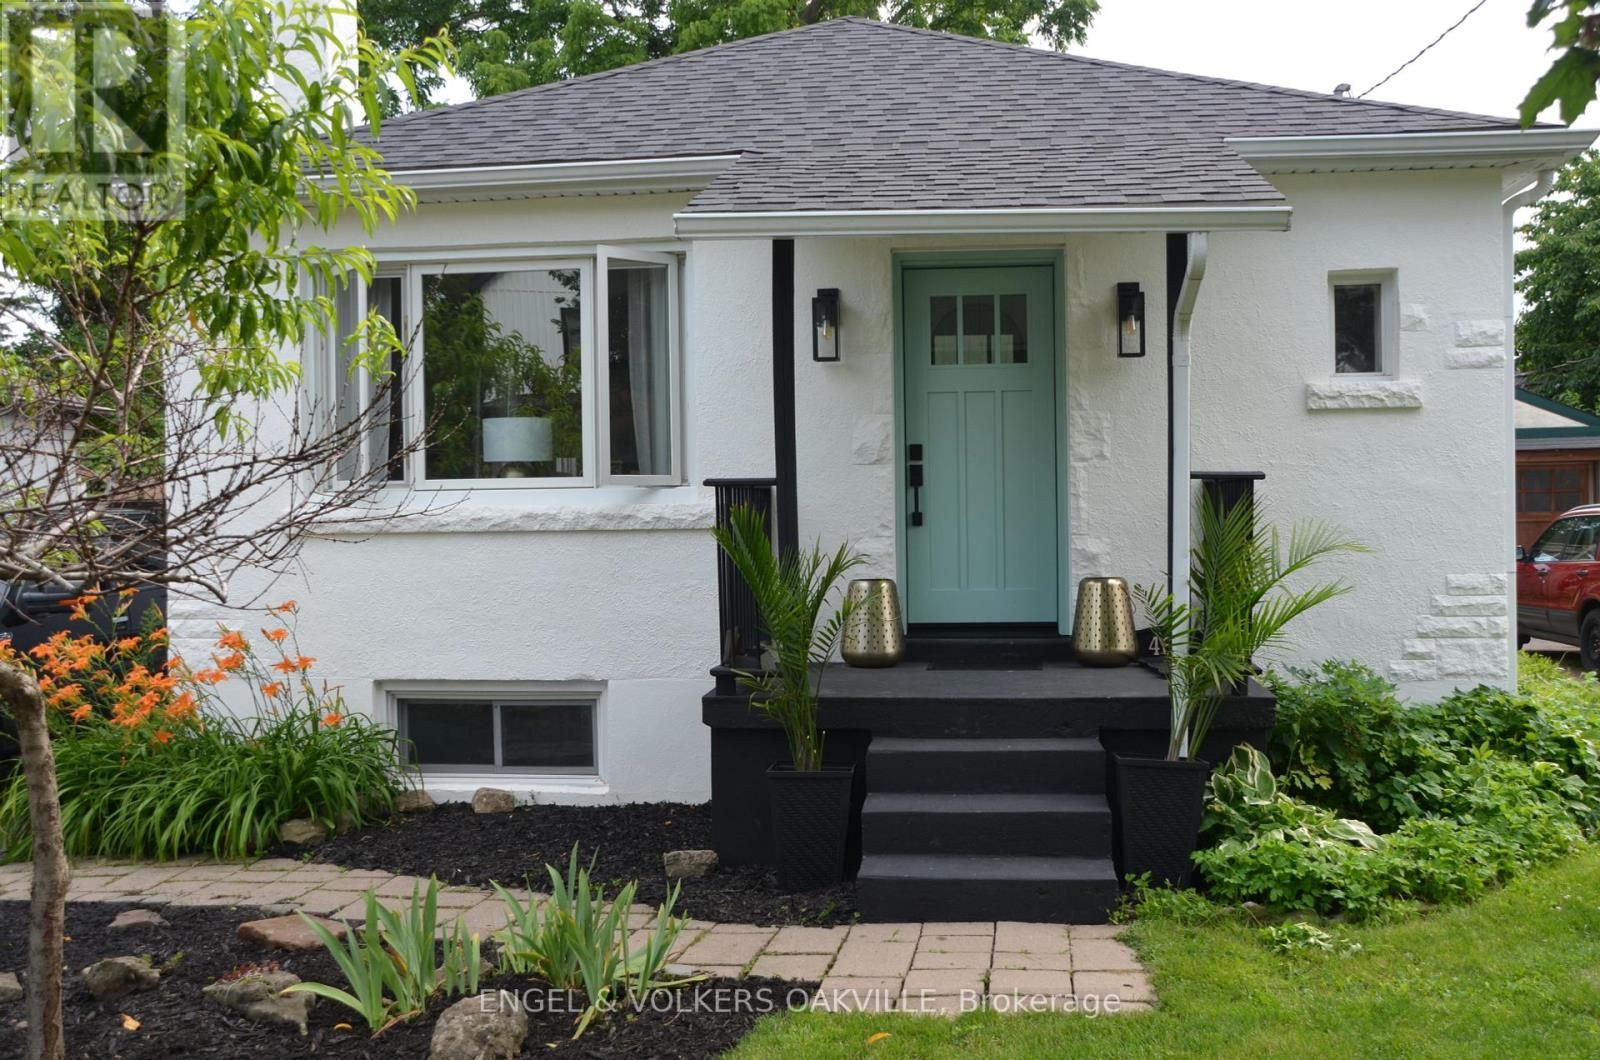 Main Photo: 468 CROSBY AVE in Burlington: House for sale : MLS®# W7040738